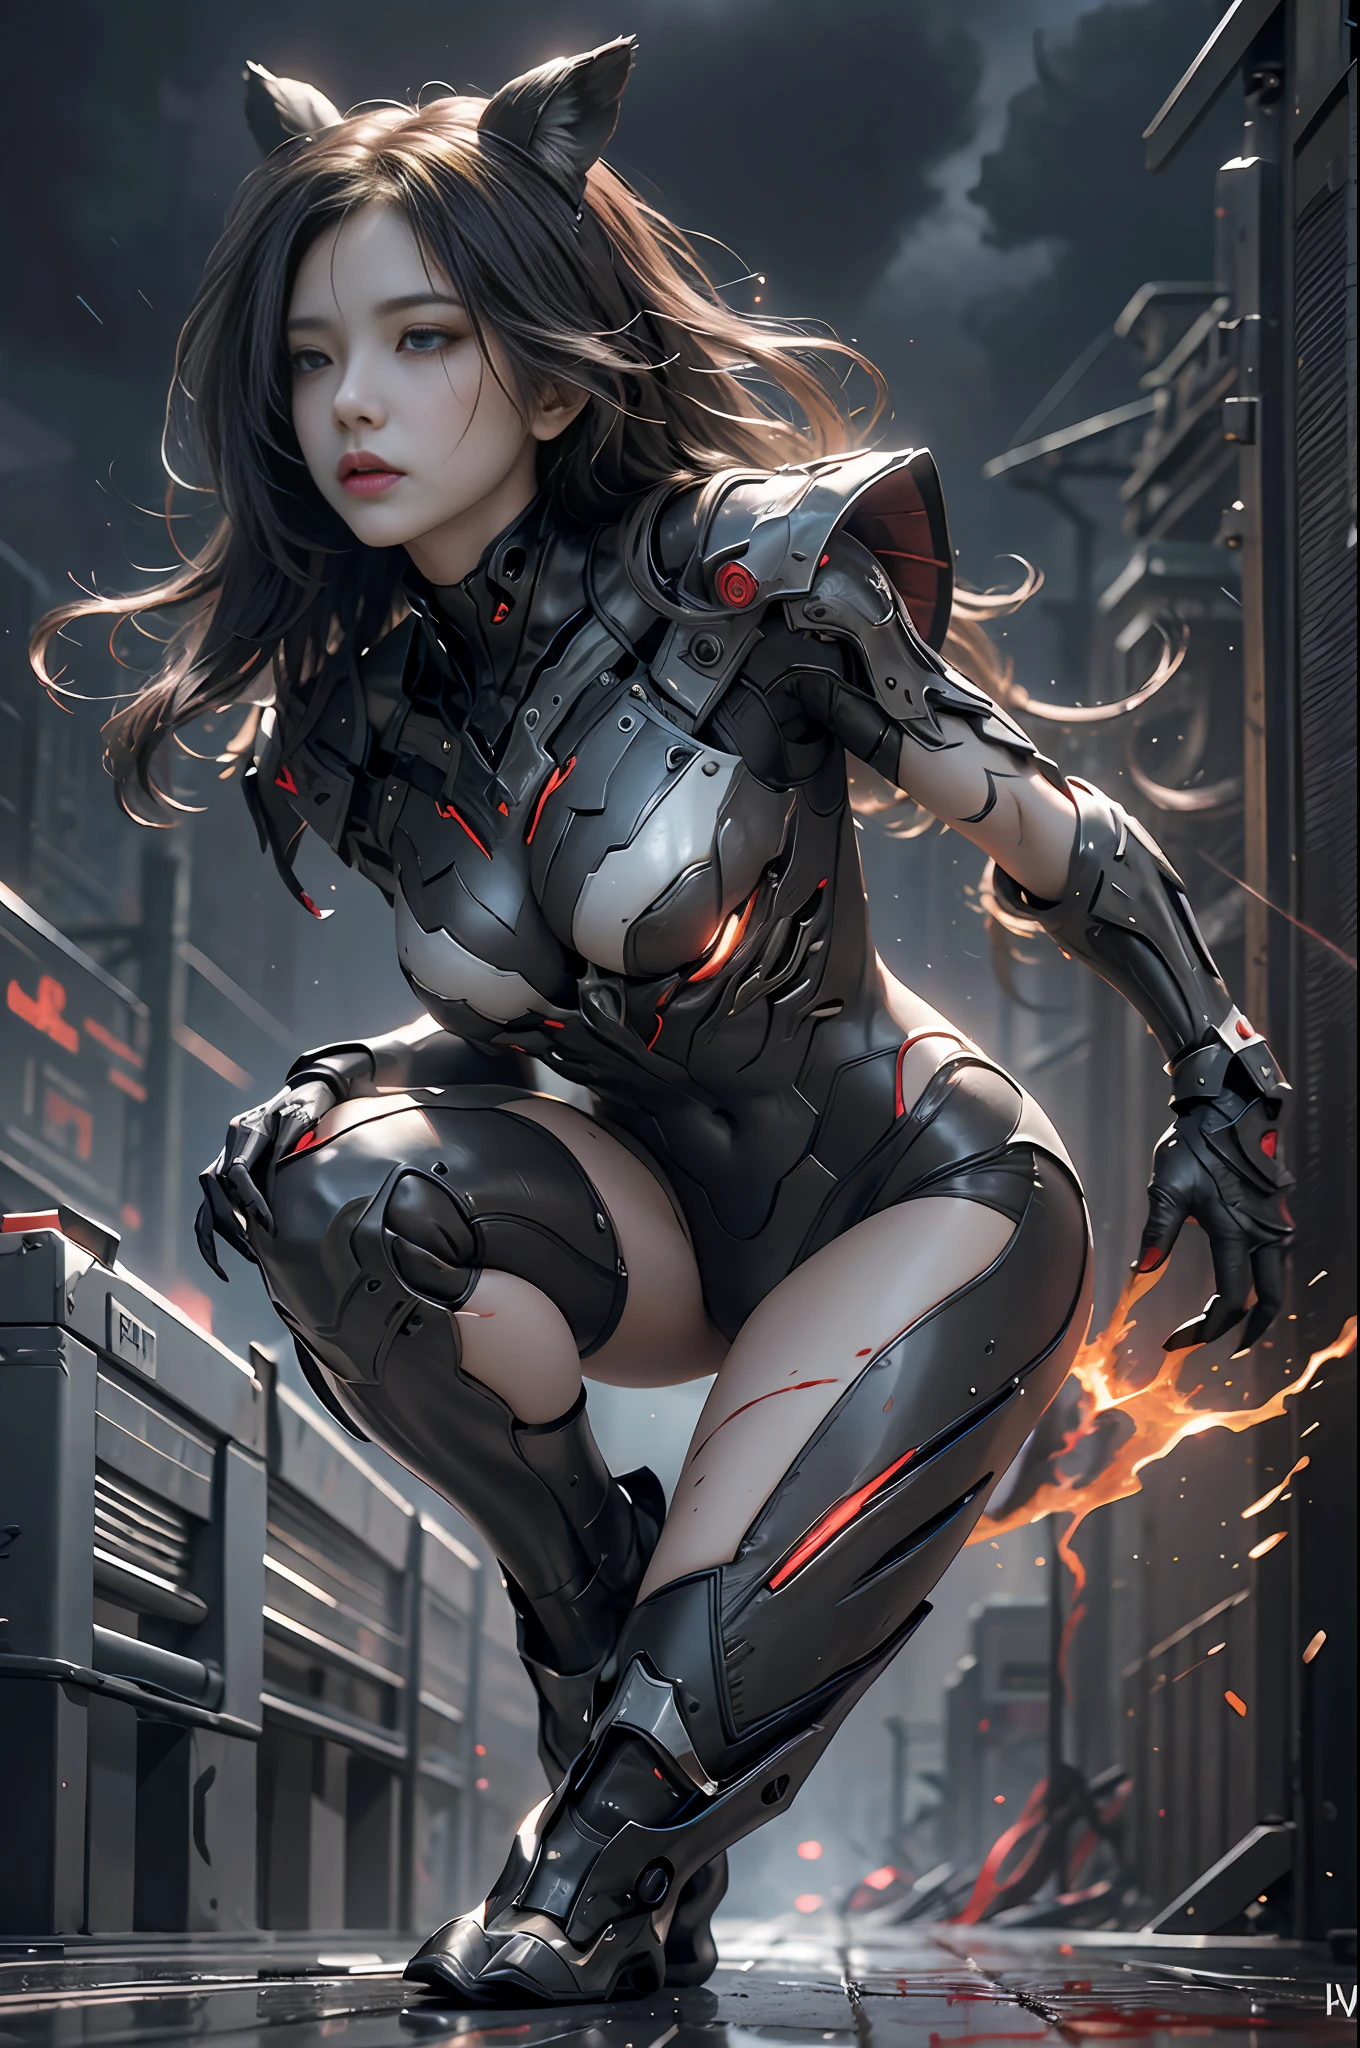 1 chinese girl, warframe, intricate pattern, heavy metal, energy line, heroic beauty head, glowing eyes, elegant, intense, blood red and black uniform, solo, modern, city, street, dark clouds, thunderstorm, heavy rain, dramatic lighting, (masterpiece:1.2), best quality, high resolution, beautiful details, extremely detailed, perfect lighting, 1 Chinese, warframe, Prime, rhinoceros prime, volt prime, saryn prime dynamic pose, Intricate patterns, heavy metal, energy lines, faceless, glowing eyes, long silver hair, windblown hair, elegant, intense, blood red and black uniform, bloody wings, solo, desert, sunny, bright, claws, dramatic lighting, (masterpiece: 1.2), best quality, high resolution, beautiful details, extremely detailed, perfect lighting, stroke, full body shot, martial arts moves